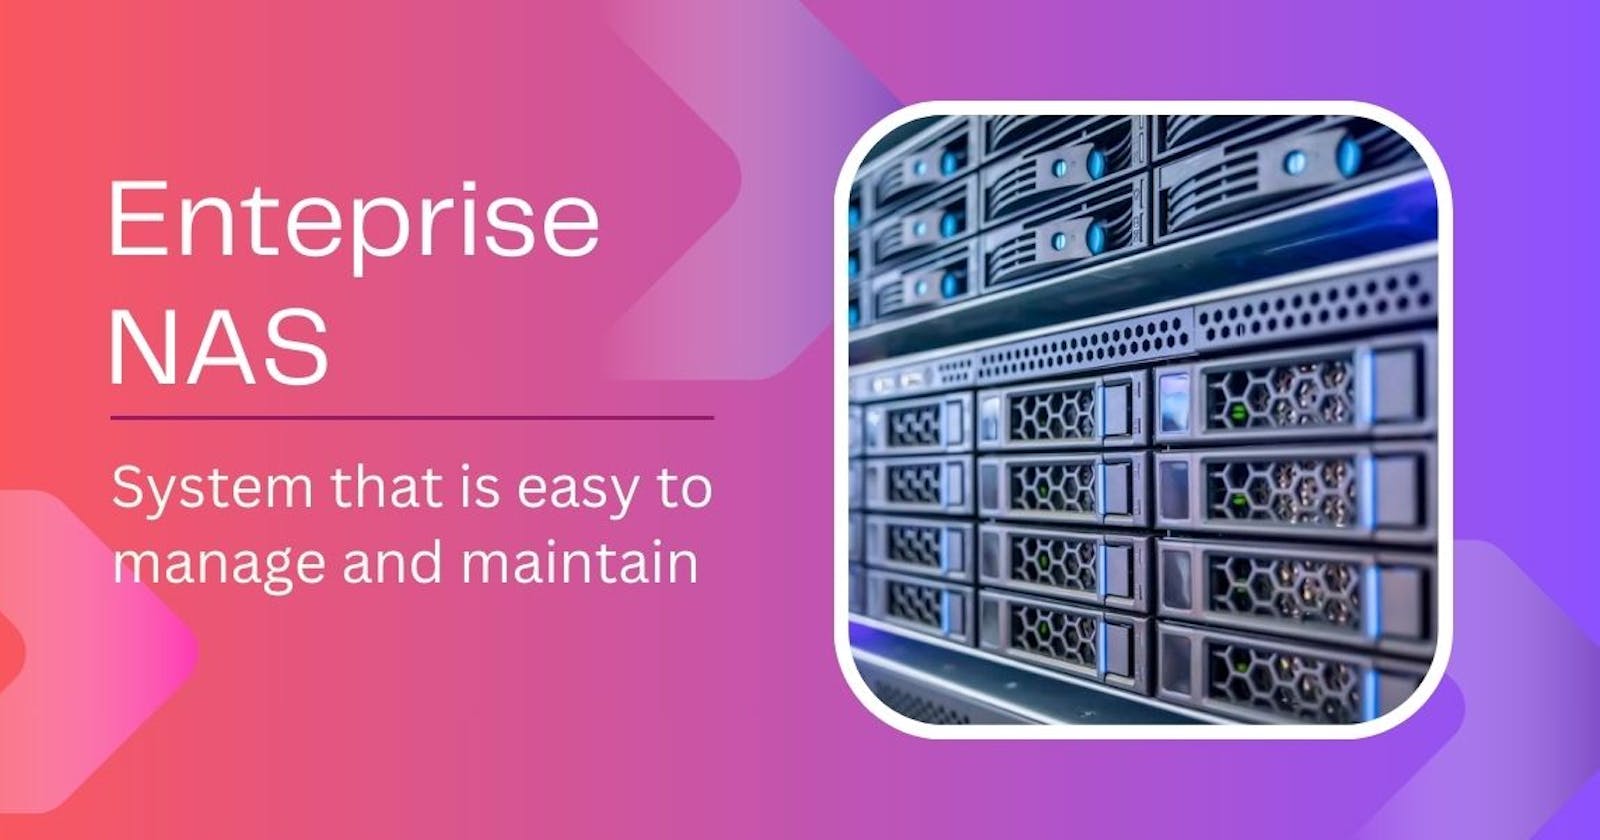 How to Choose the Right Type of Enterprise NAS for Your Business?